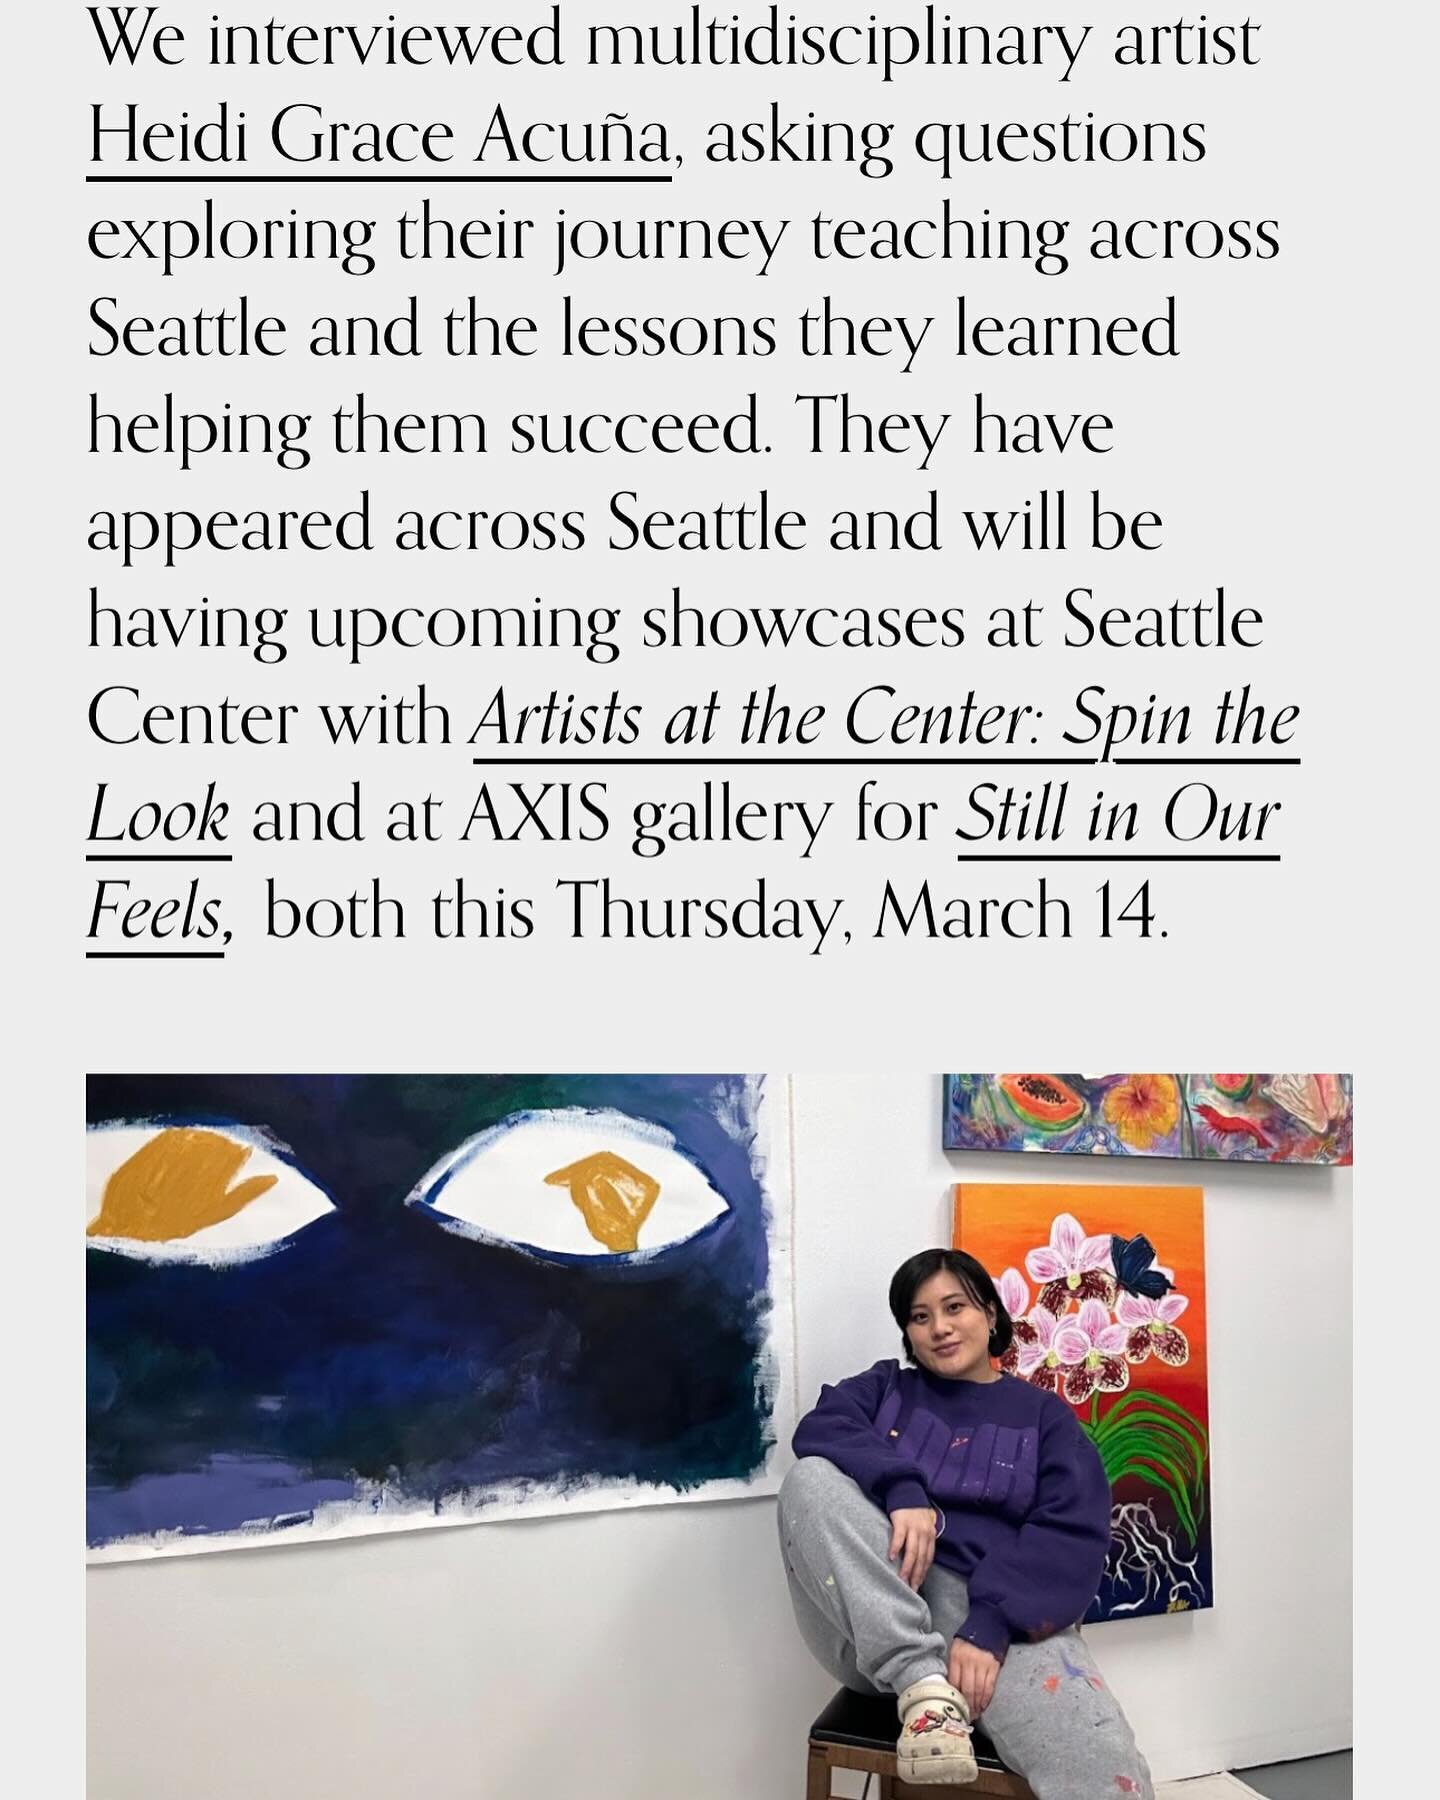 from &lsquo;ewa beach to seattle!! my childhood friend @baldo.mb interviewed me for @theeverecho 👯

thank you Michael for the interview where we talked about my art and fashion events, teaching art in the community, and advice for young creatives!

